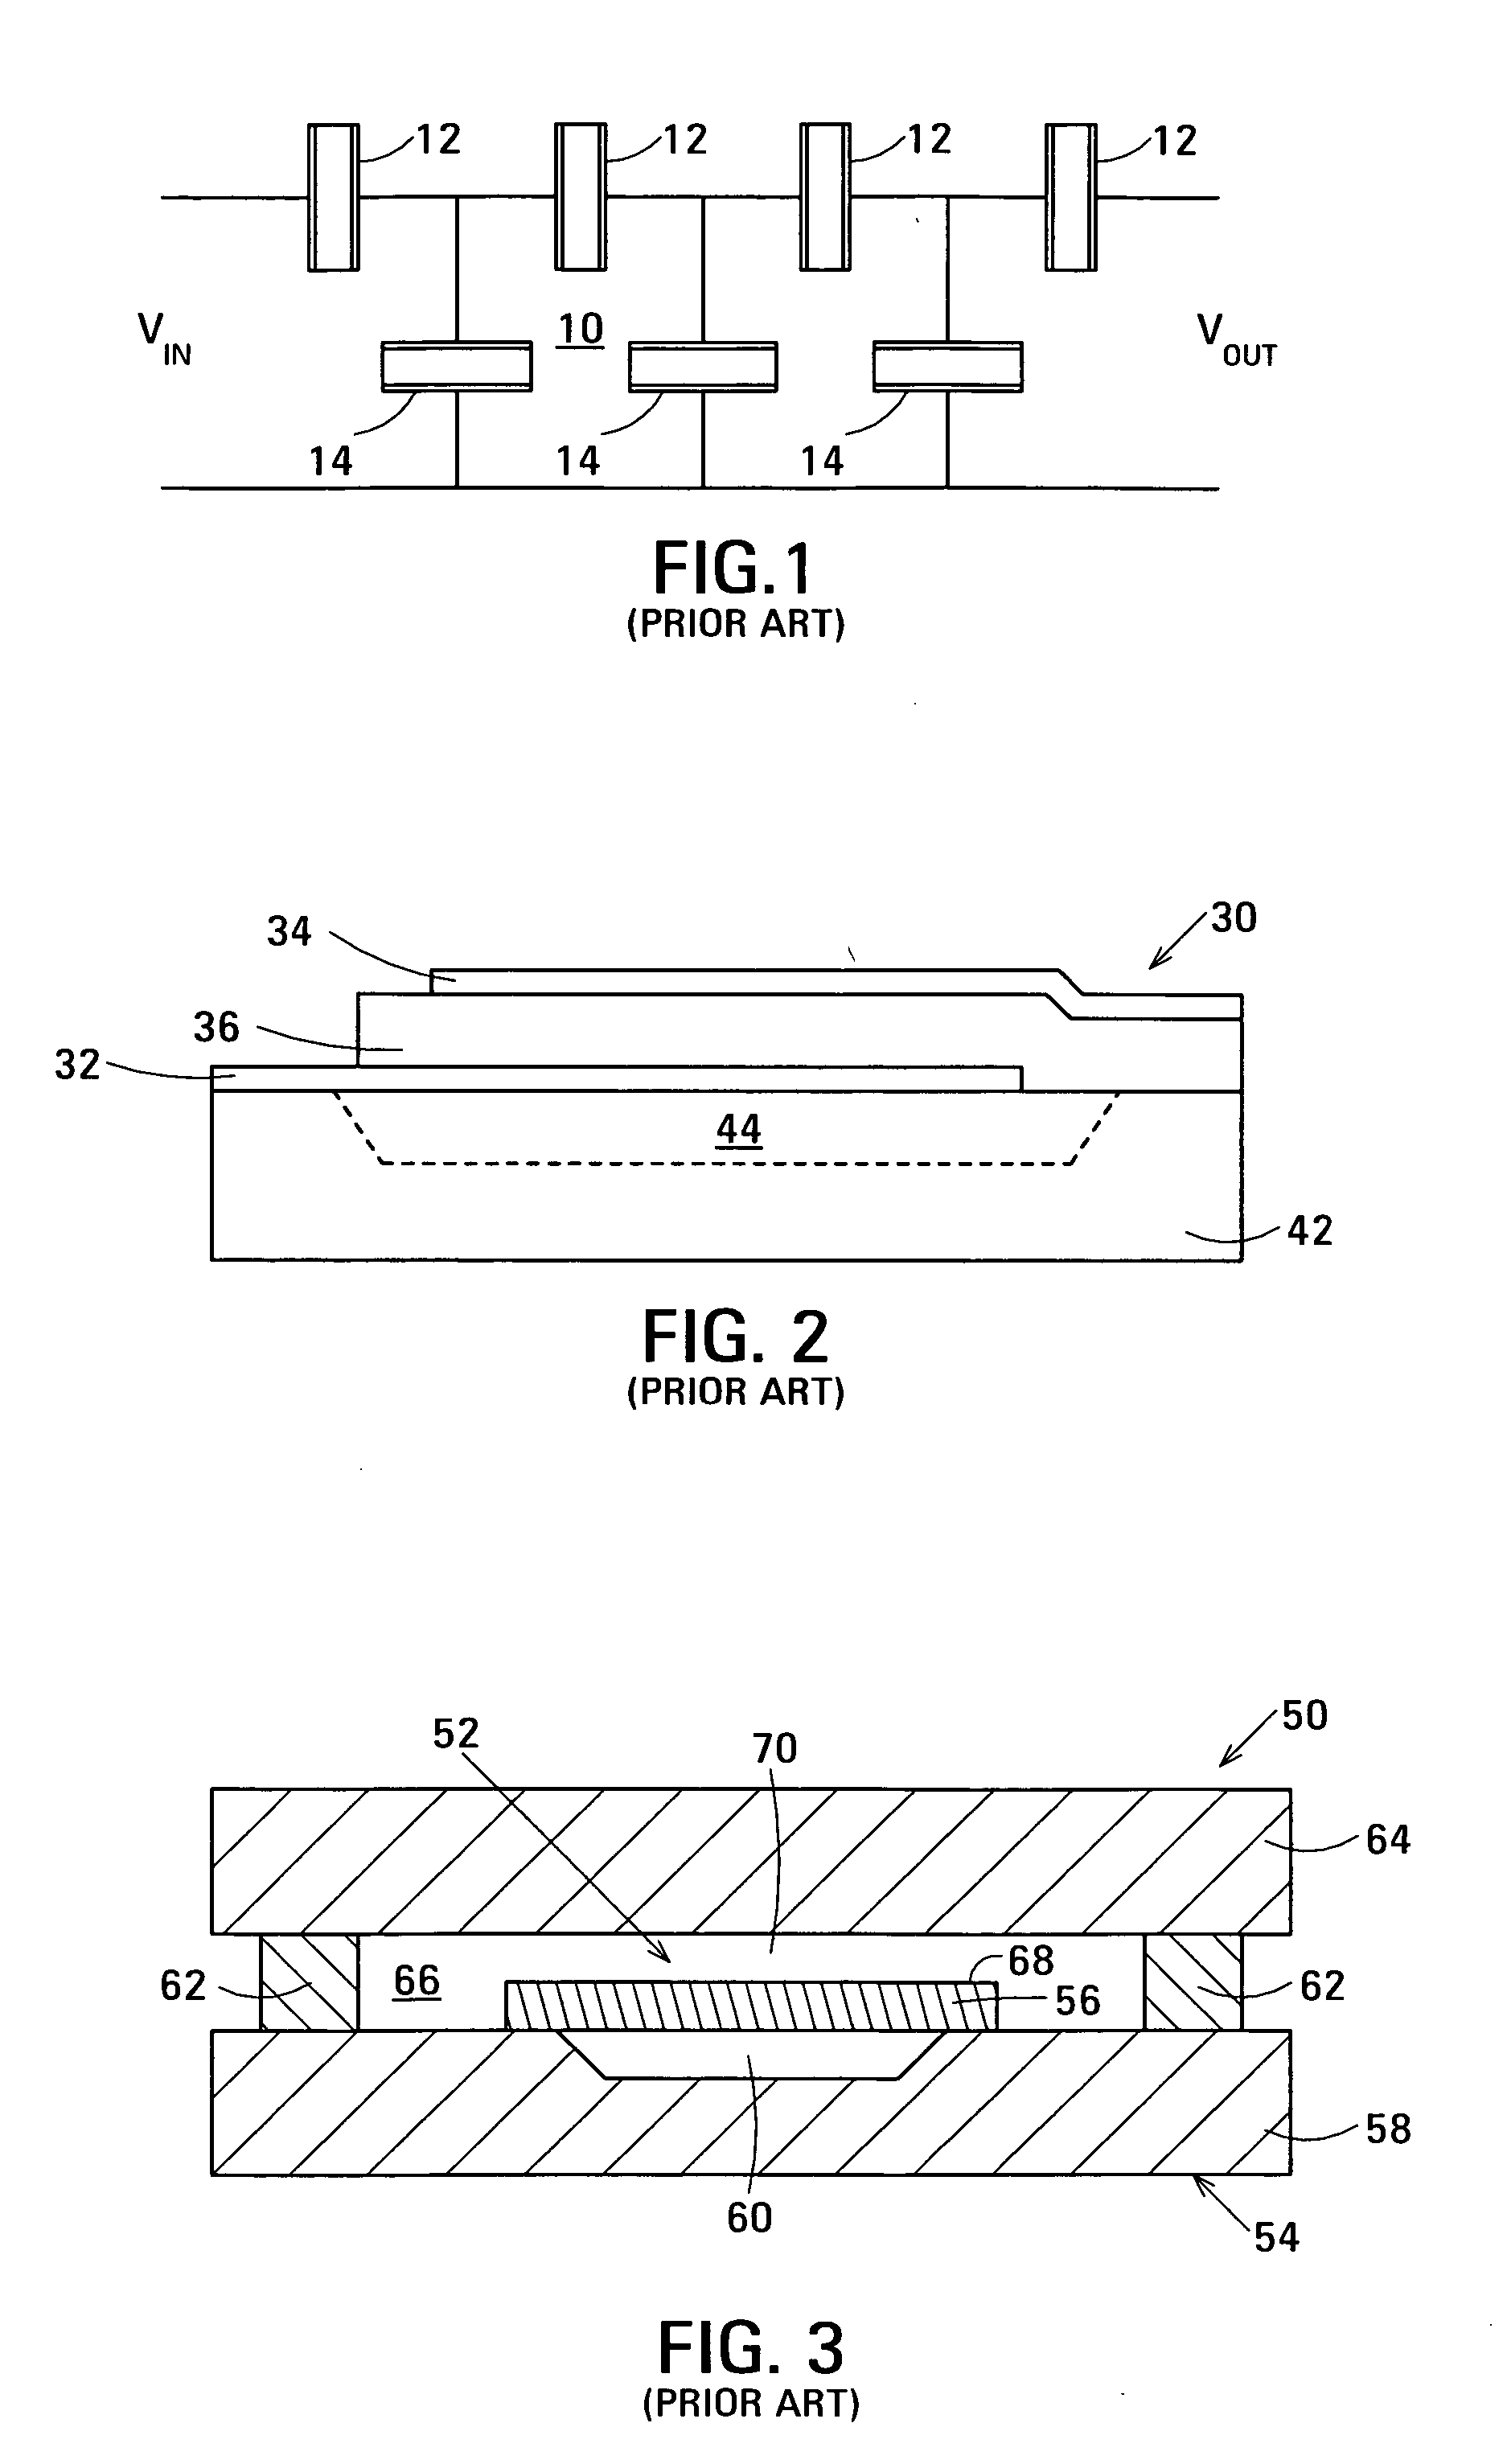 Film bulk acoustic resonator (FBAR) devices with simplified packaging